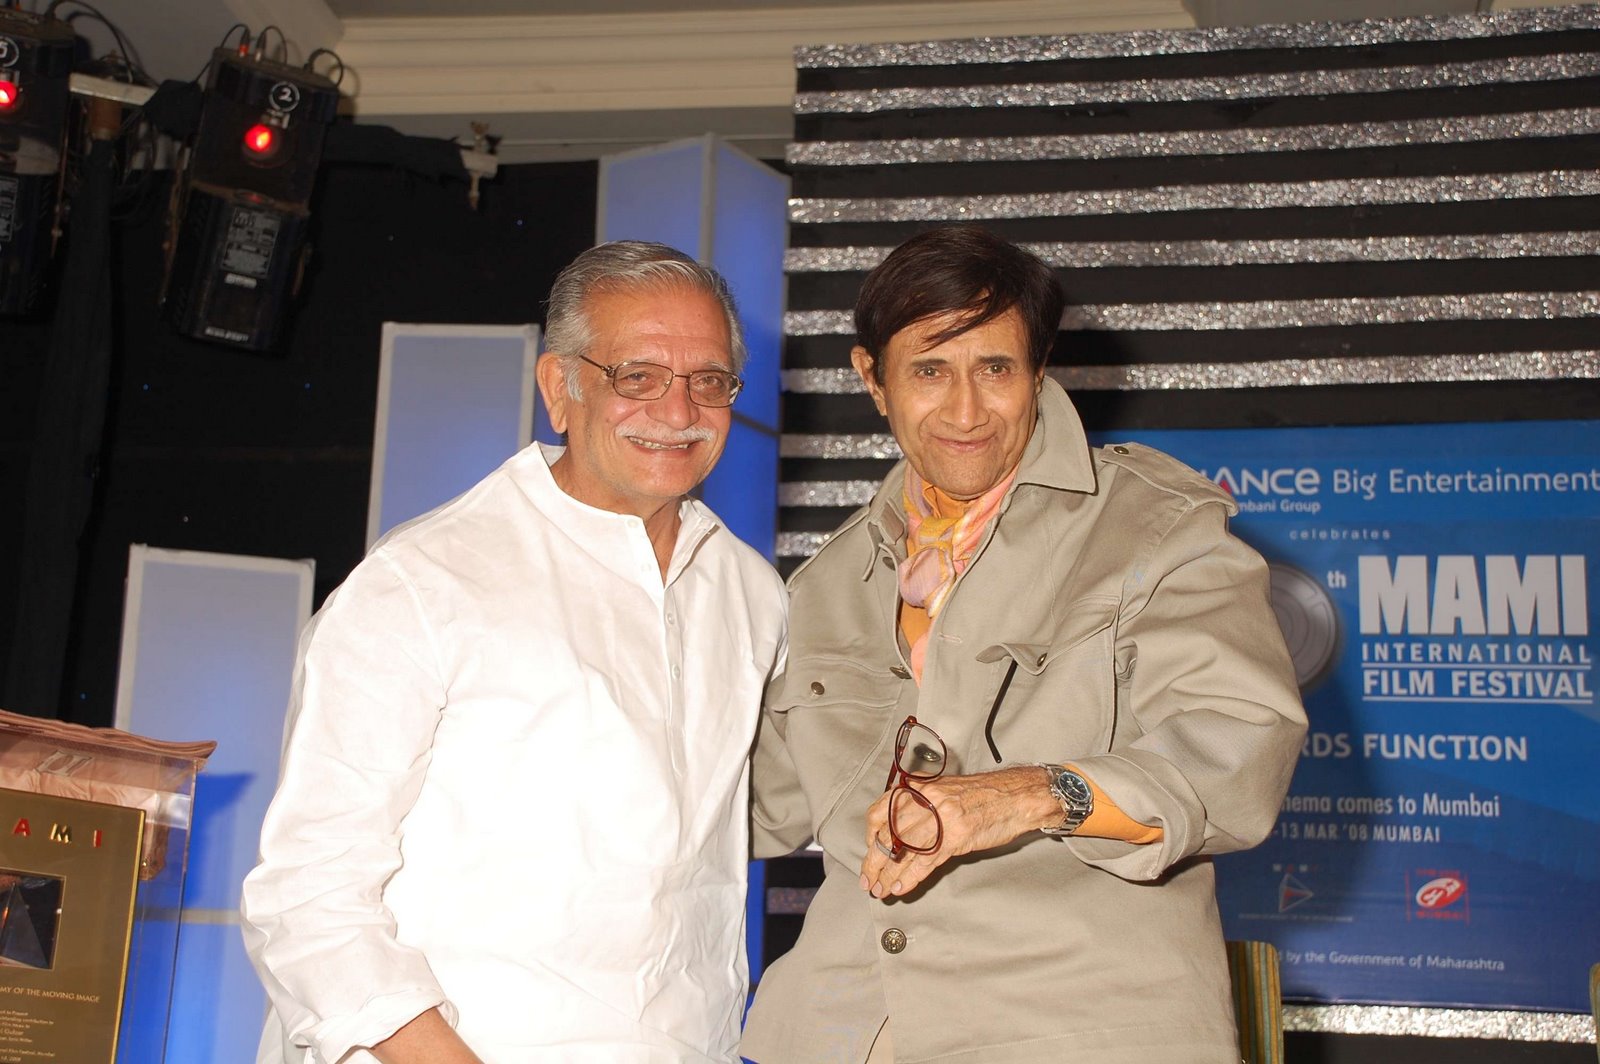 [Shri+Gulzar+feliciated+by+Dev+Anand+for+Outstanding+Contribution+to+Indian+Film+Music+as+Lyrics+Writer-1.JPG]